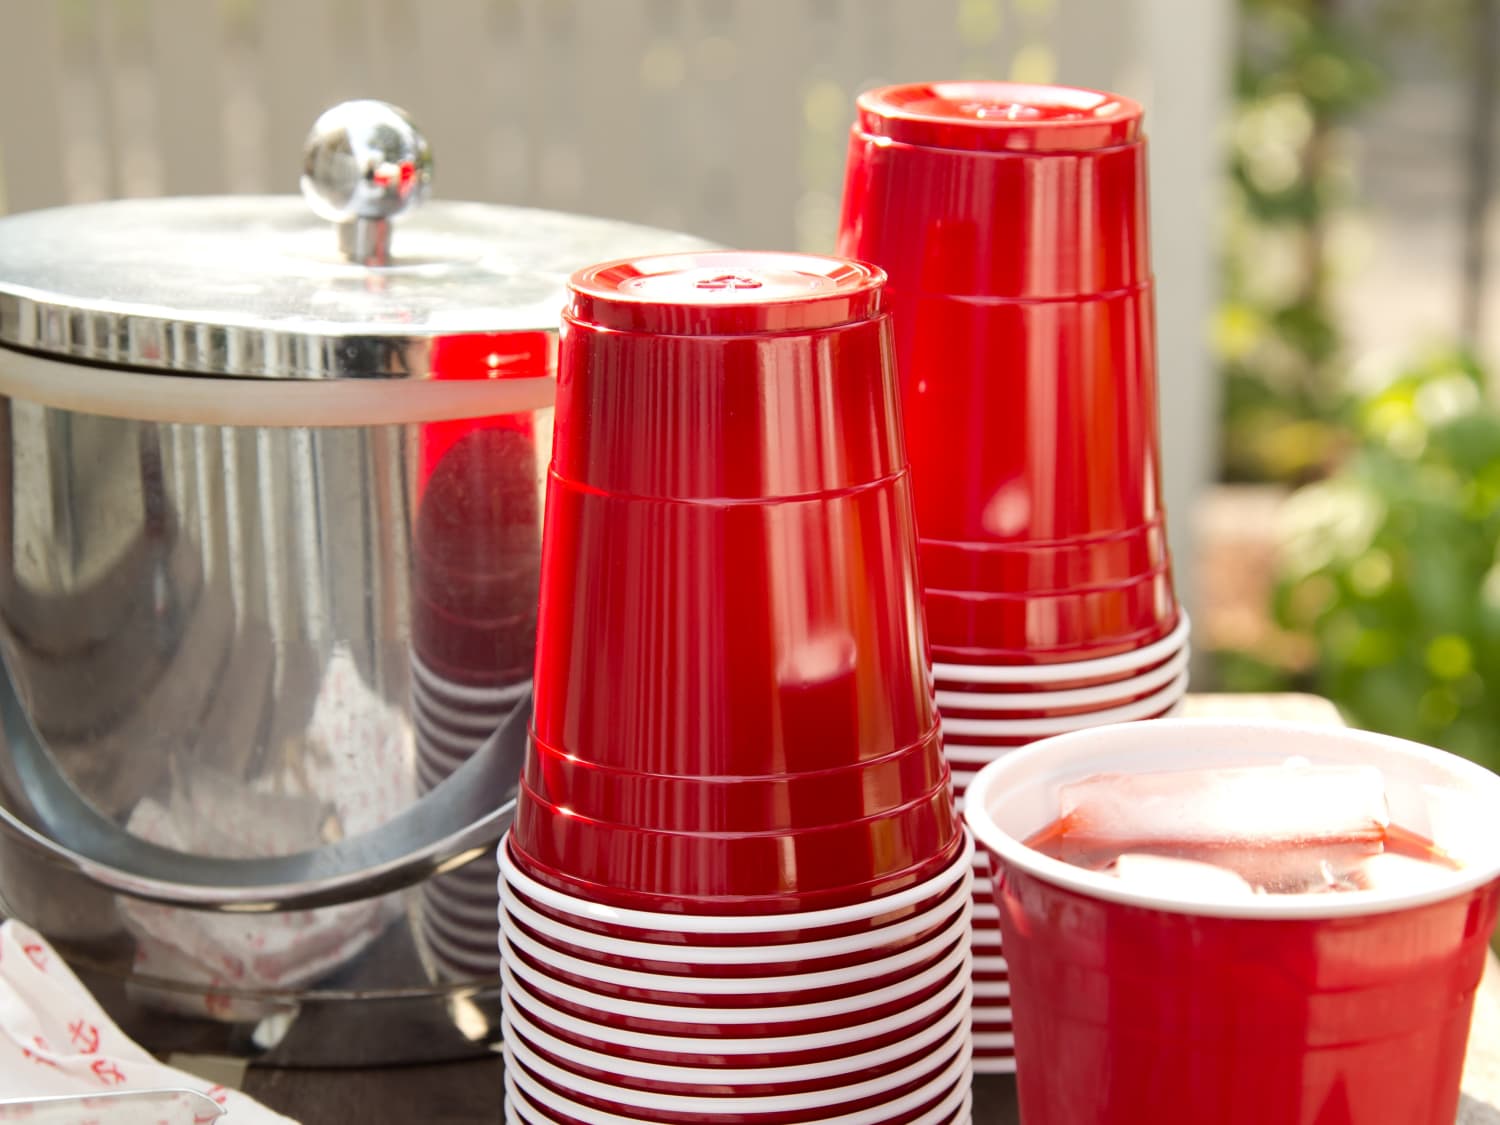 The Secret Feature of the Iconic Red Solo Cup